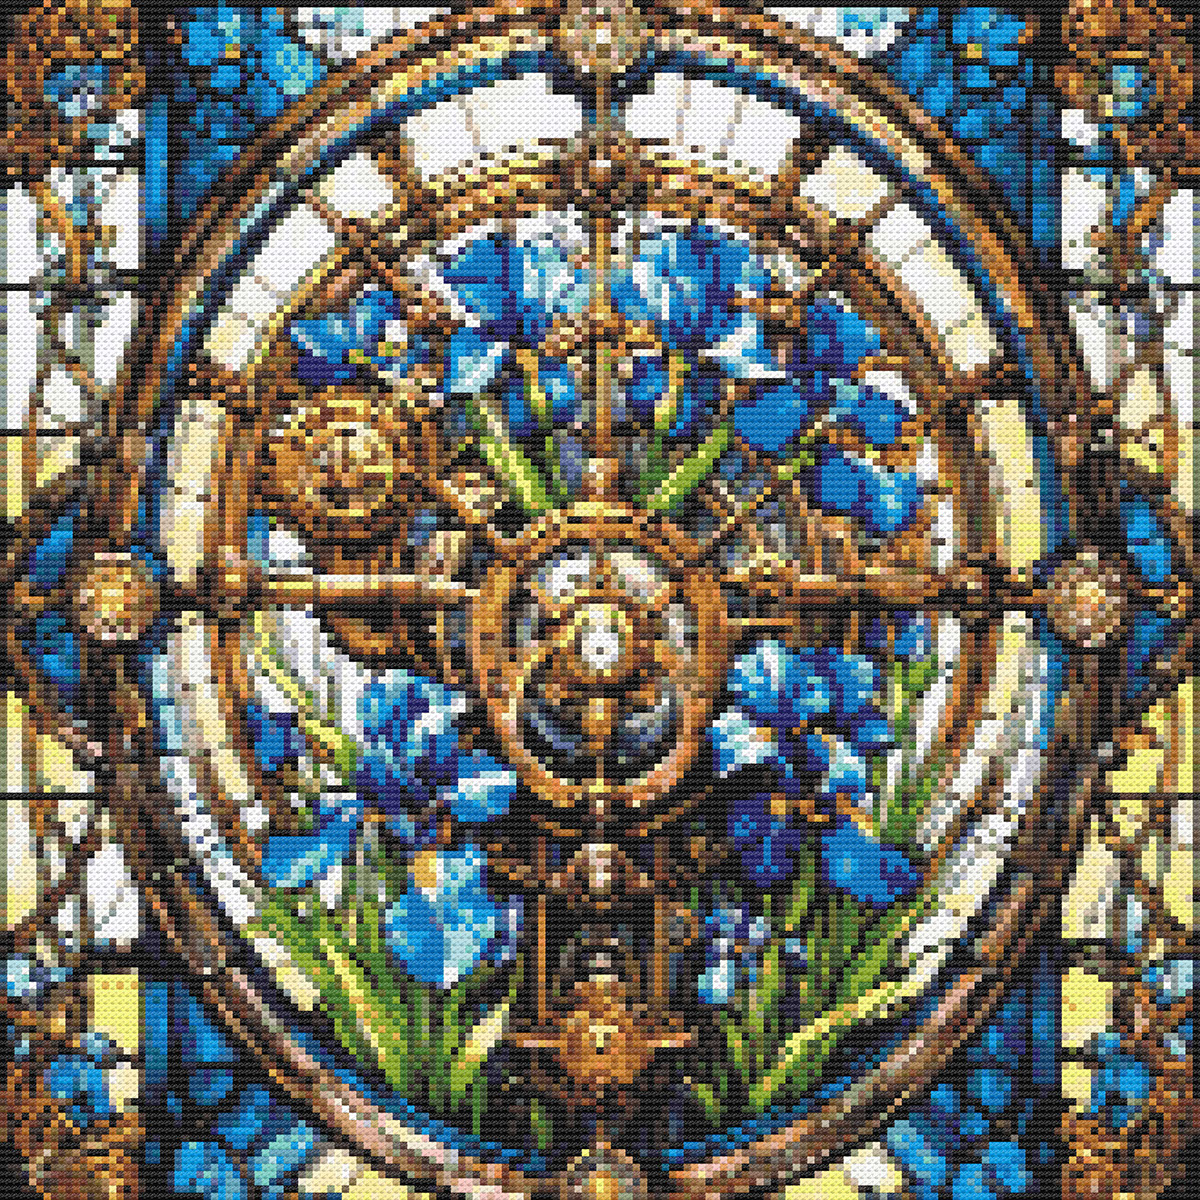 Iris and Stained Glass rendition image